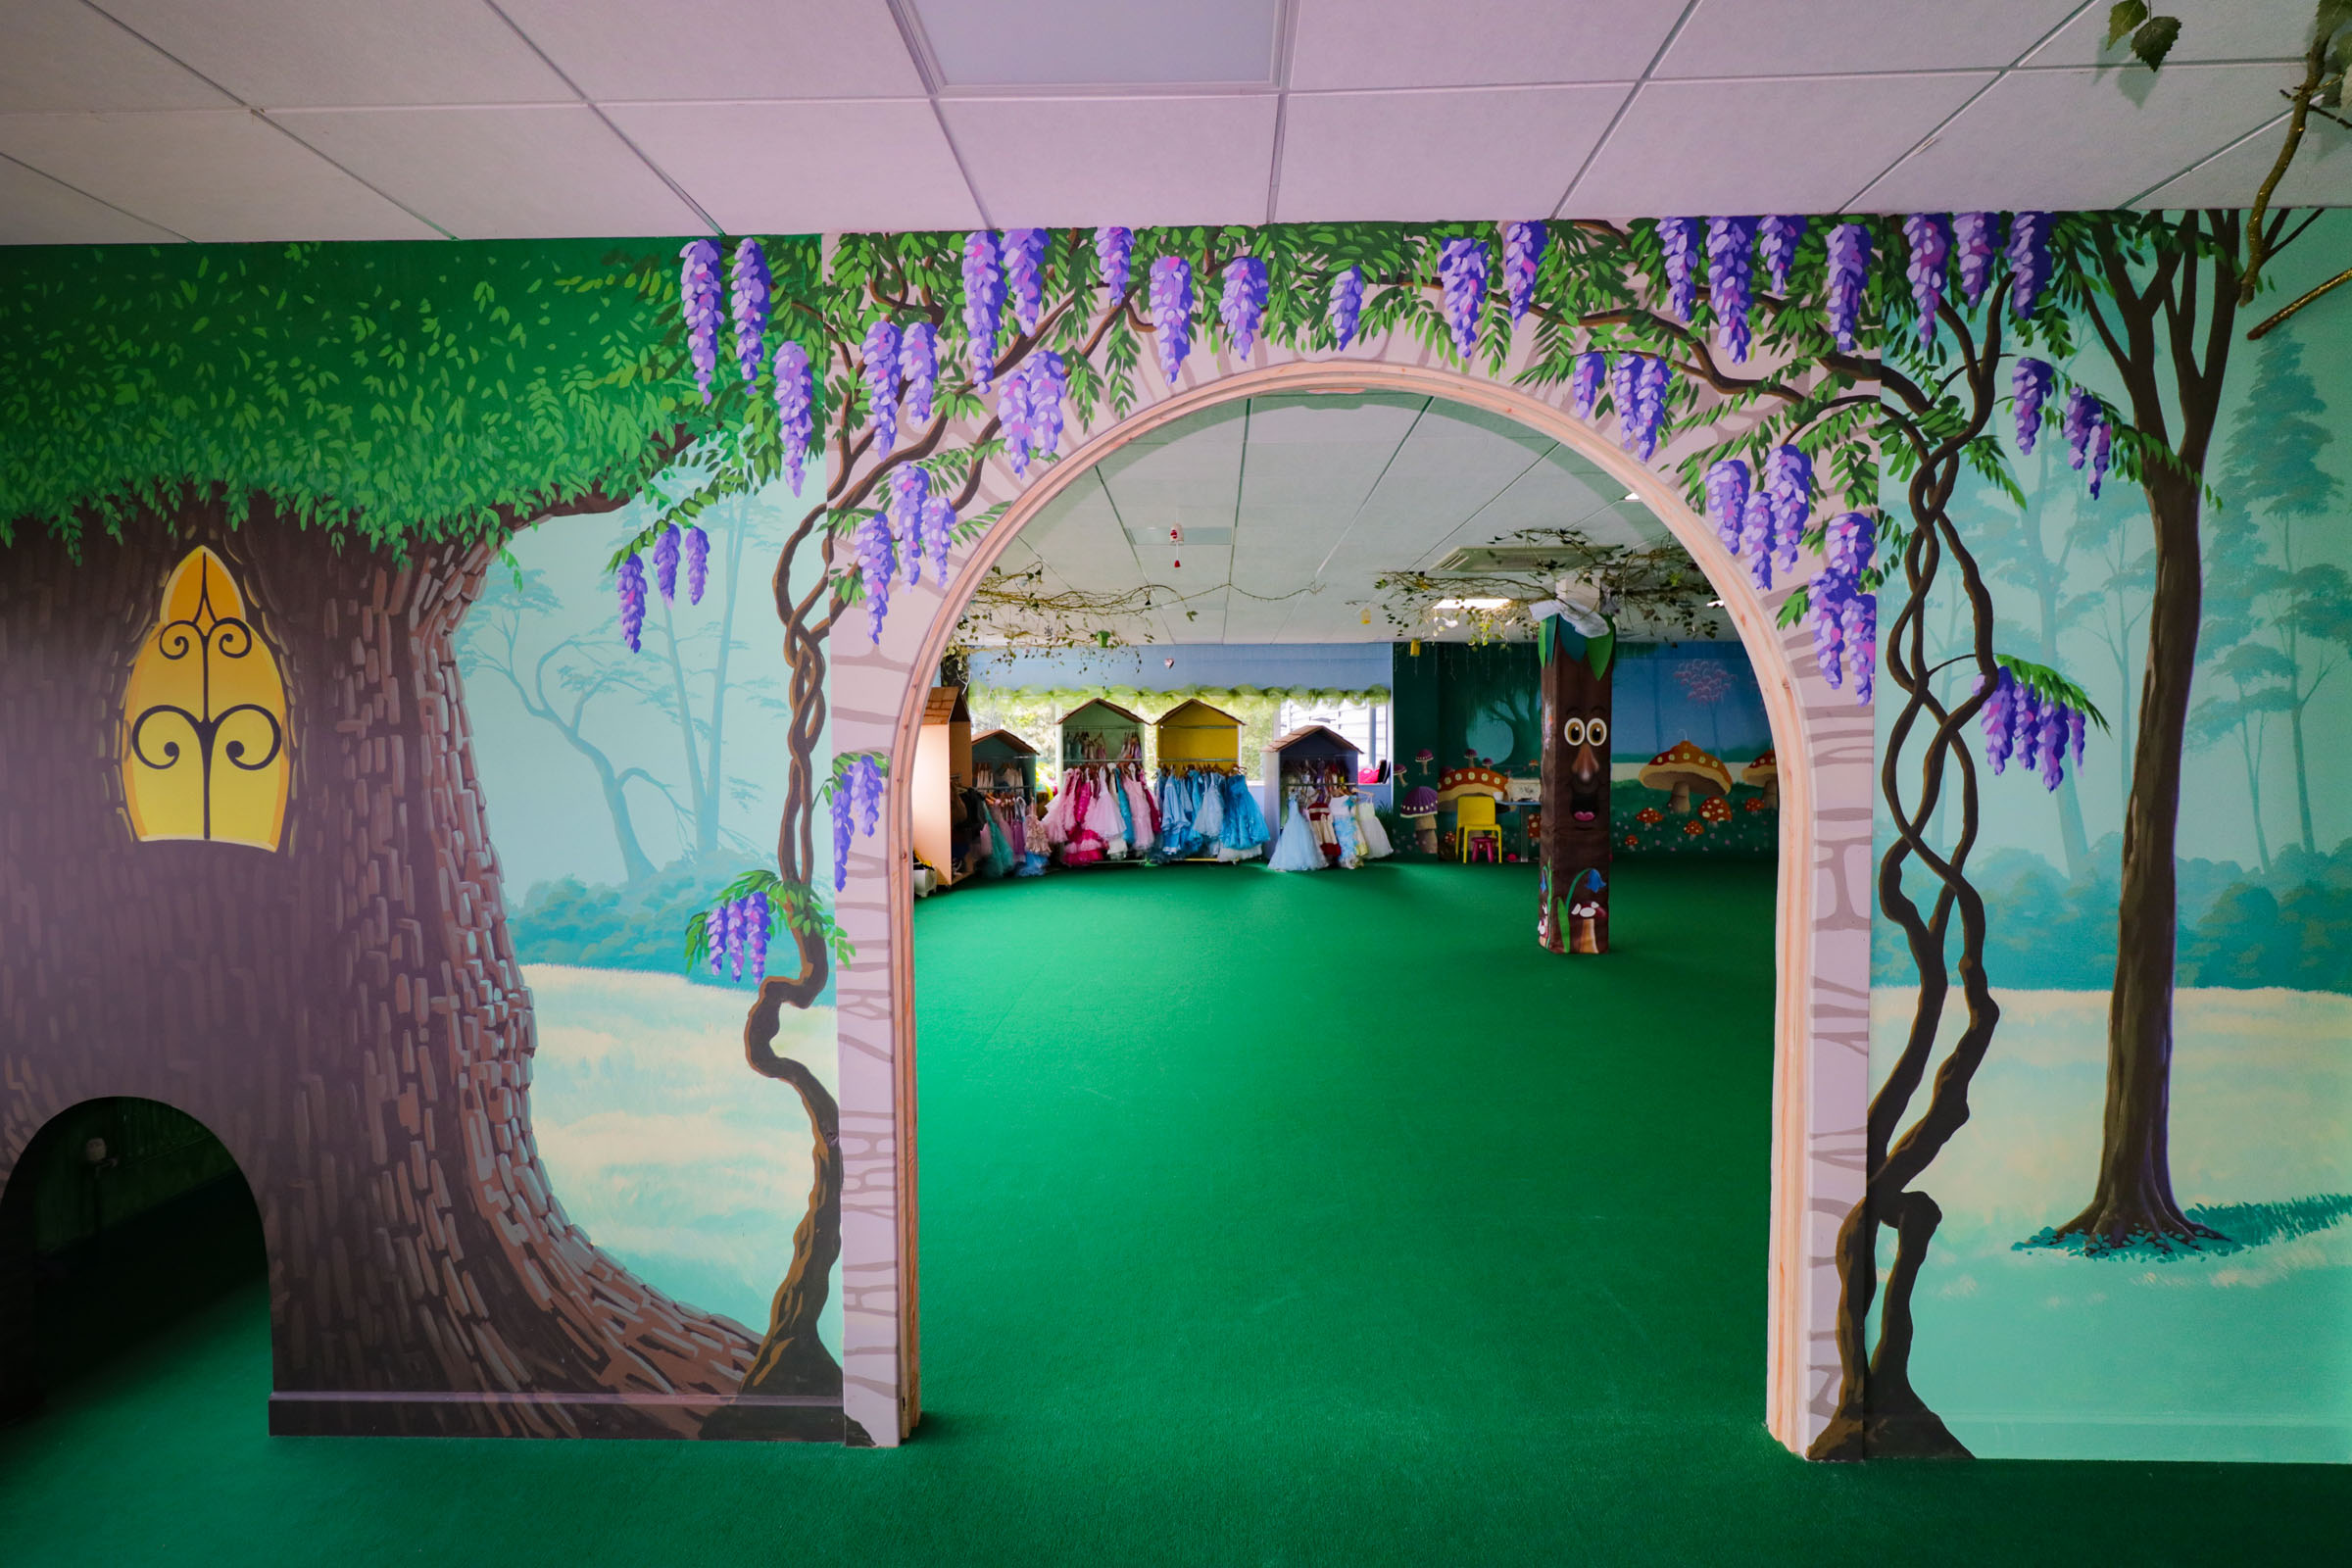 Magic Forest Party Room at the Riverside Hub, with wisteria around gateway